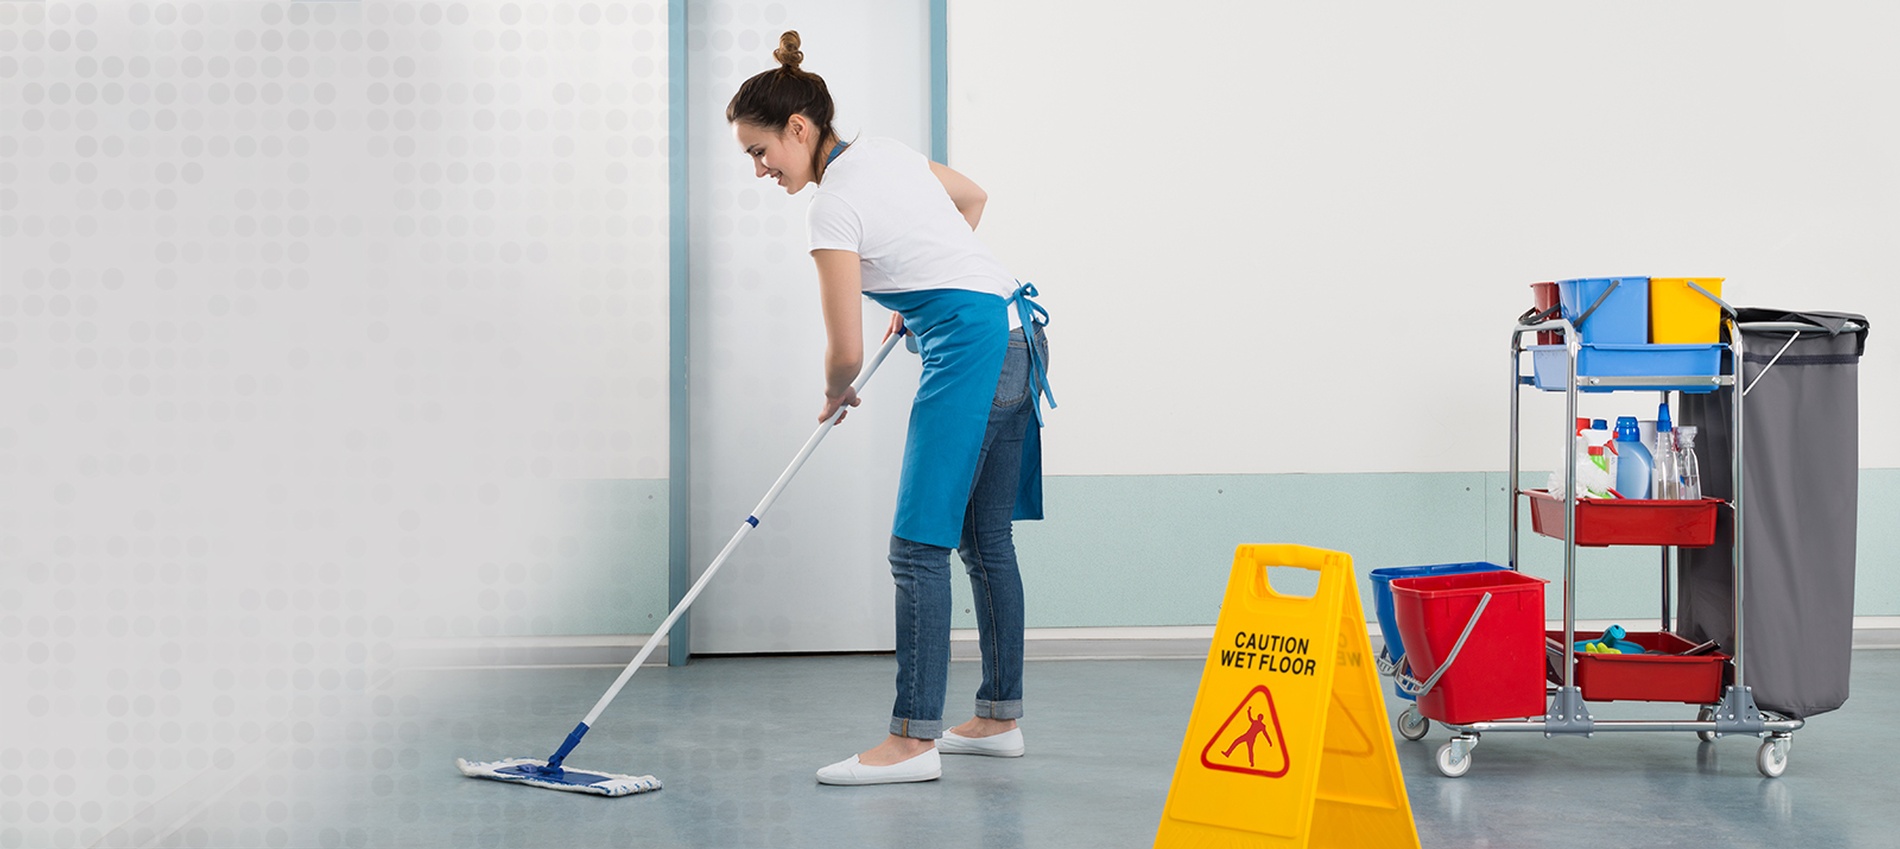 Our Professional Cleaners provide Janitorial Cleaning Services to ensure a clean environment for businesses